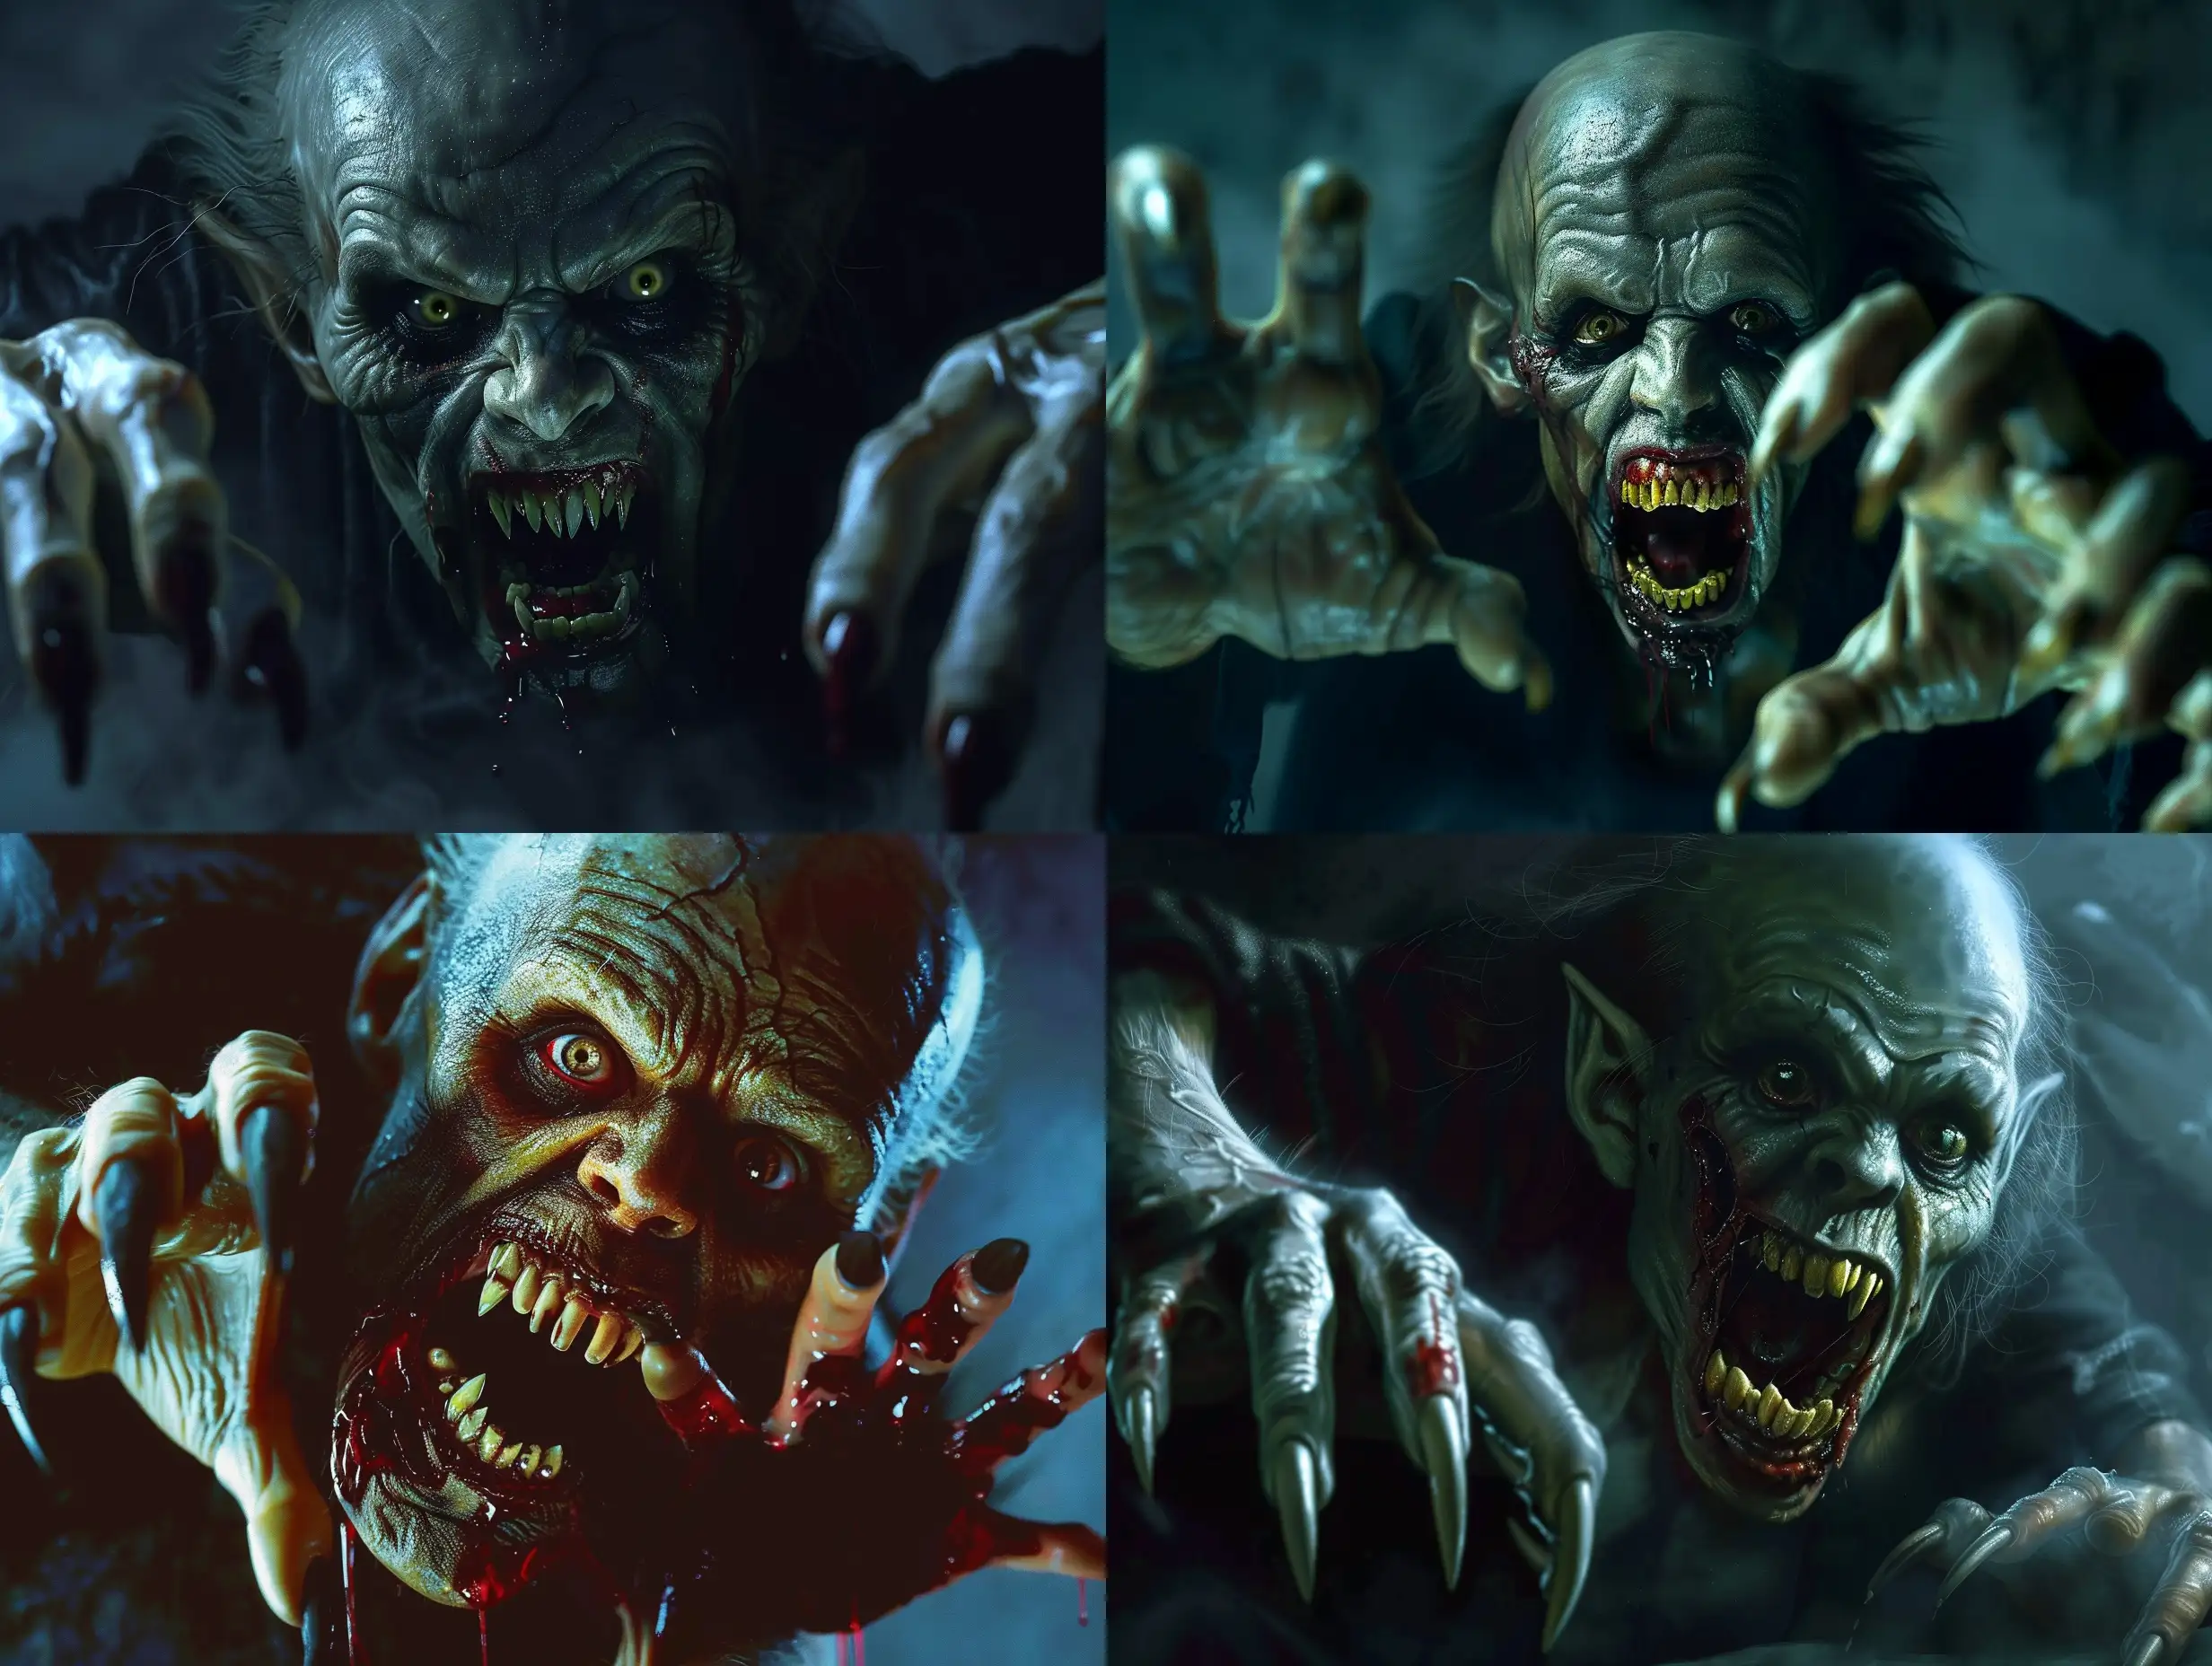 HyperRealistic-Monstrous-Female-Vampire-with-Fangs-and-Clawed-Hands-in-Dark-Scene